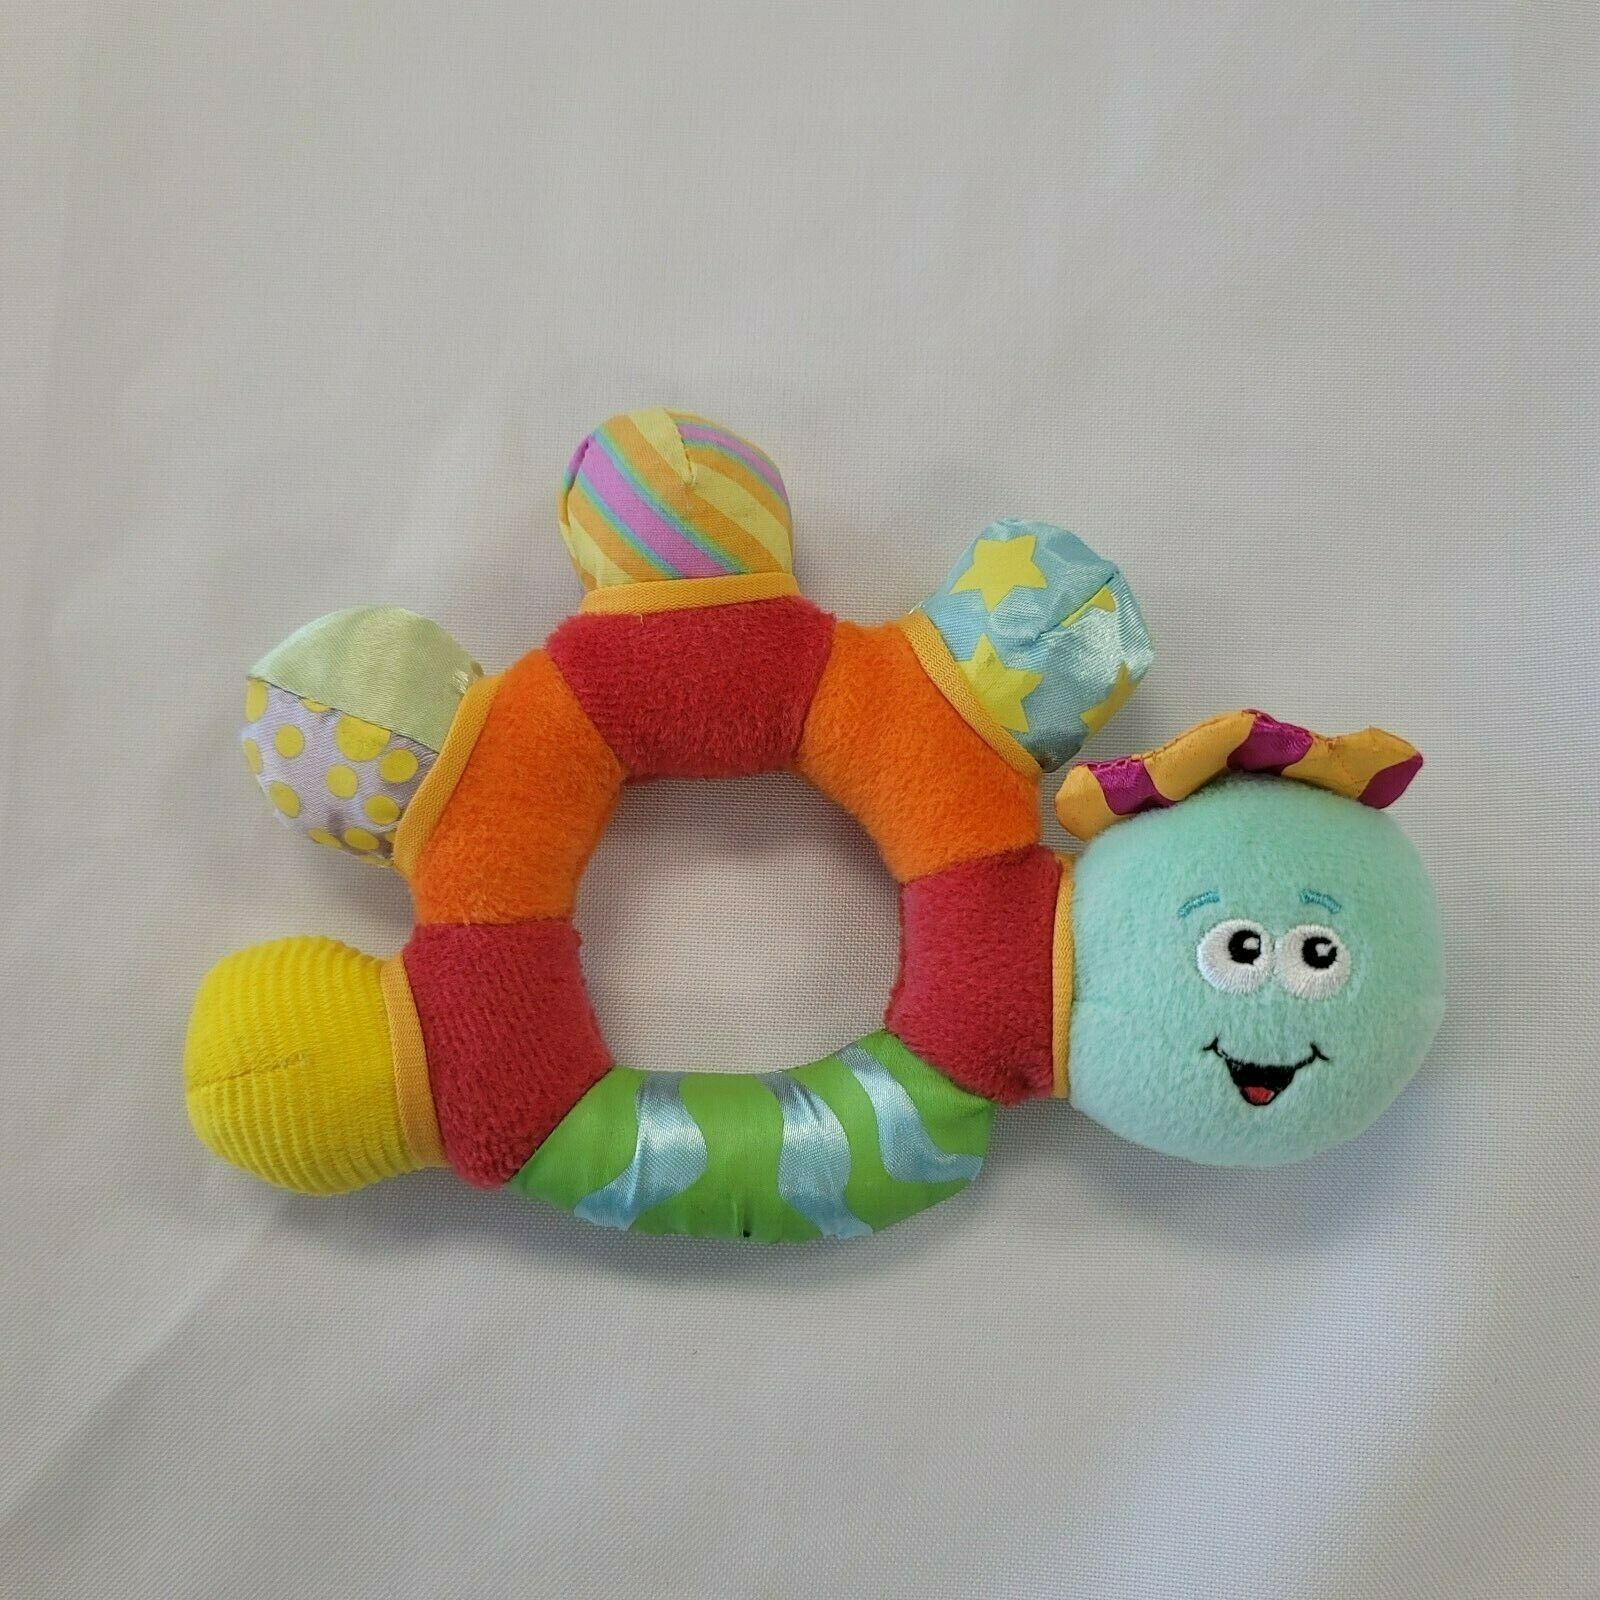 VTG The First Years Snail Bug Insect Ring Rattle Stuffed Plush Baby Toy Squeak - $24.74